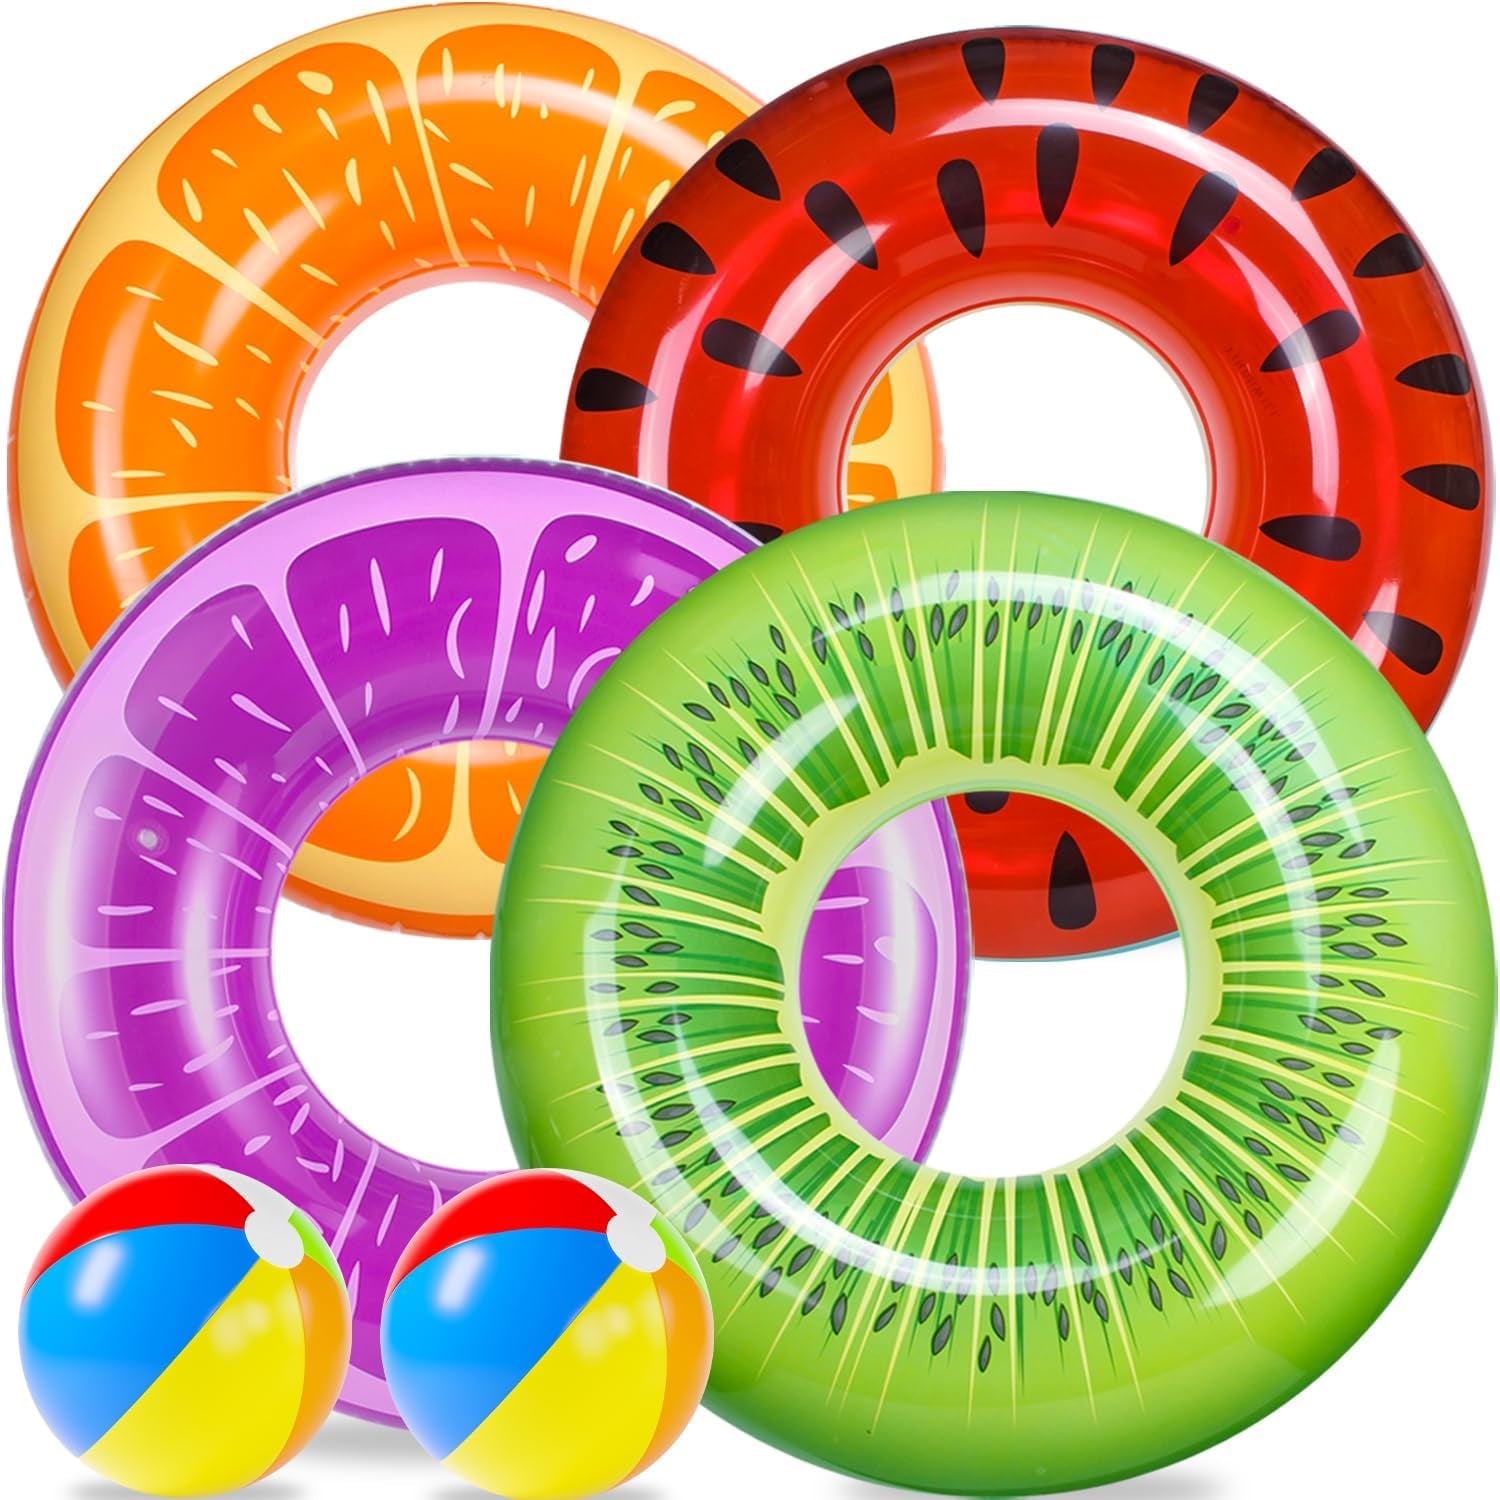 6 Pack Pool Floats Kids, Pool Swim Tubes Rings(4 Pack) - 4Pcs Inflatable Big Floaties Beach Swimming Toys with 2Pcs Beach Balls for Adults Raft Floaties Toddlers